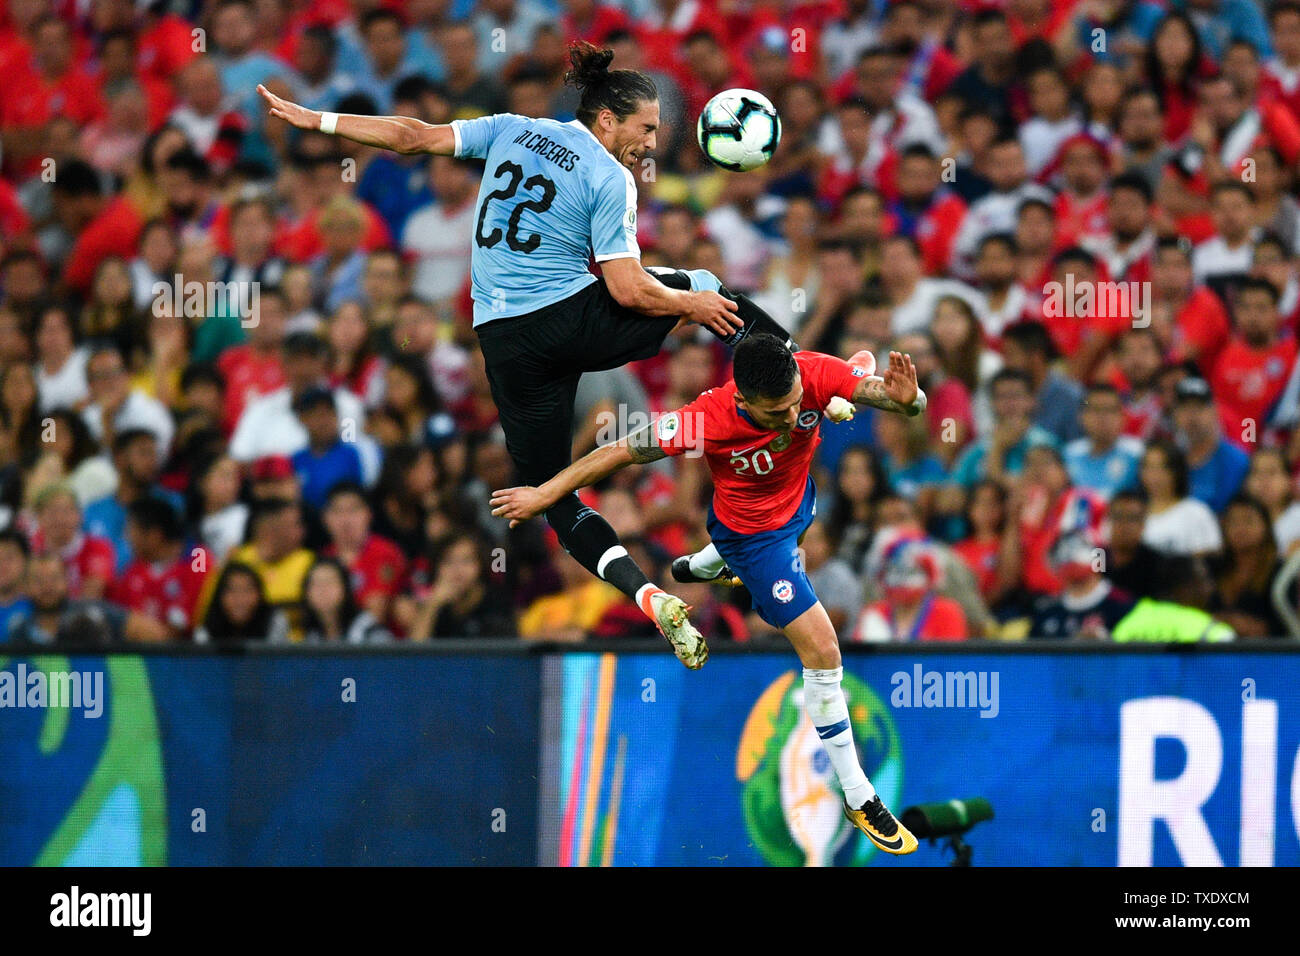 Rio De Janeiro, Brazil. 24th June, 2019. Uruguay's Martin Caceres (L) vies with Charles Aranguiz of Chile during the Copa America 2019 Group C match between Uruguay and Chile in Rio de Janeiro, Brazil, June 24, 2019. Uruguay won 1-0. Credit: Xin Yuewei/Xinhua/Alamy Live News Stock Photo